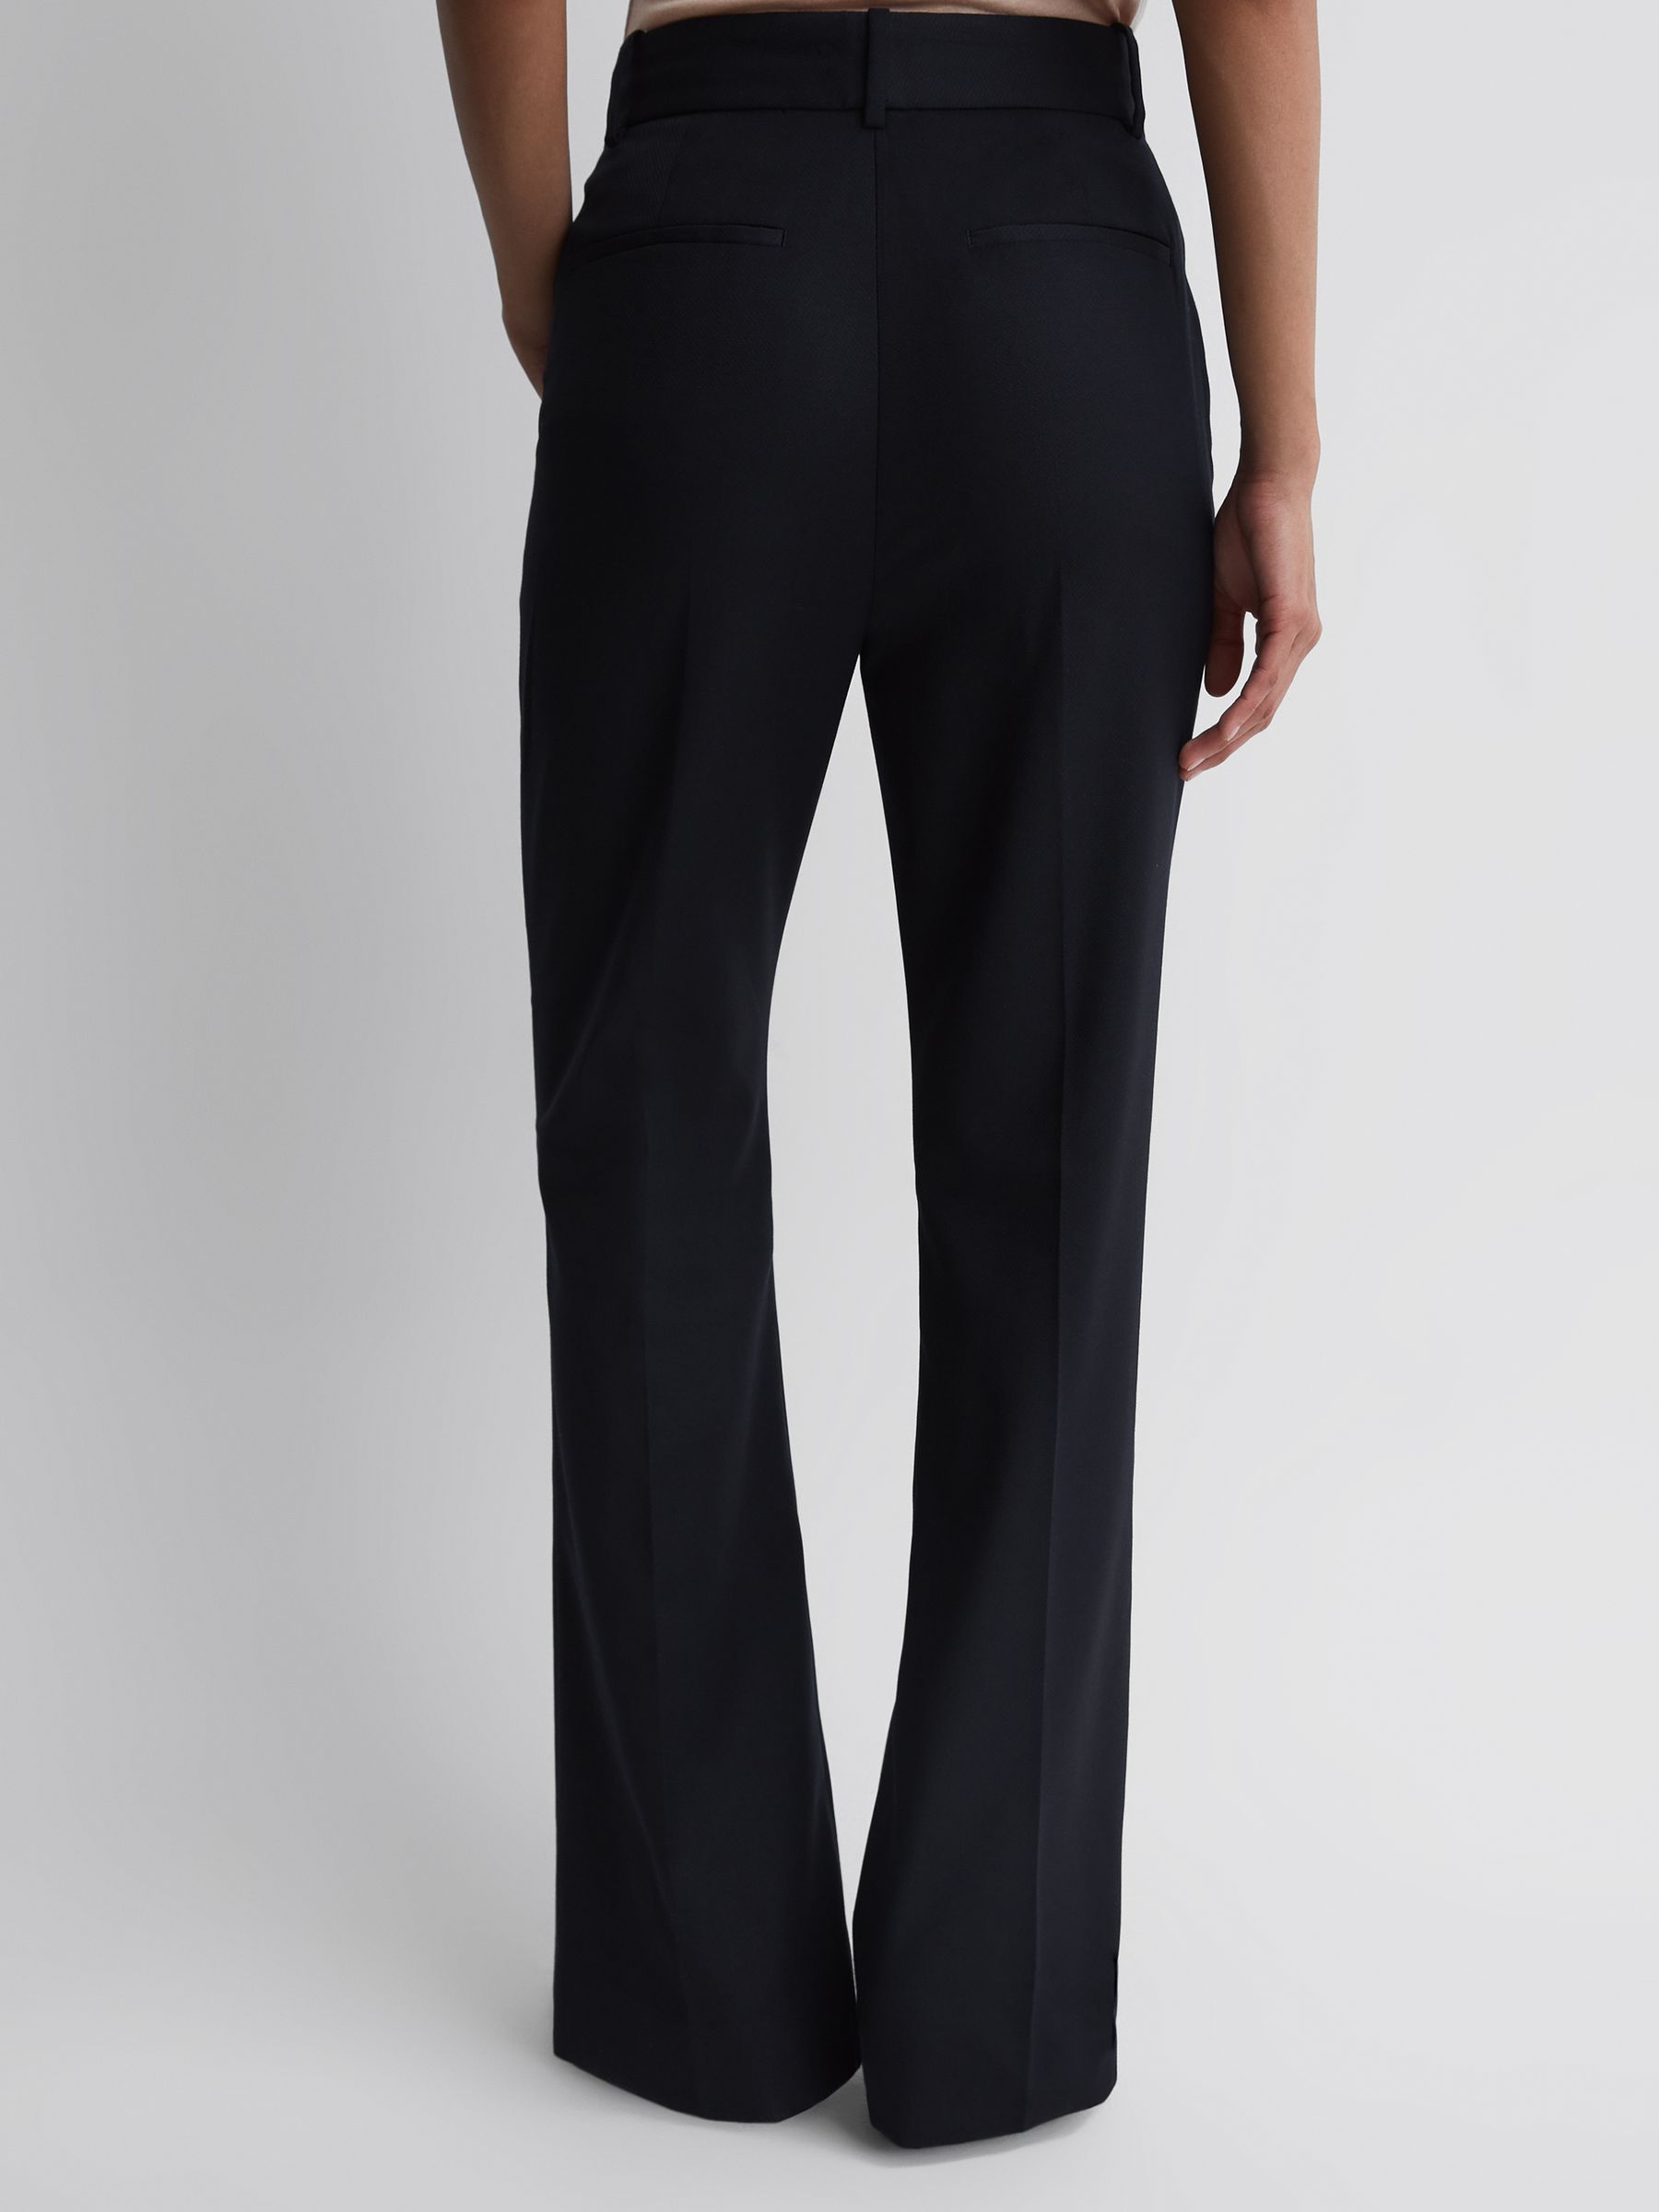 Reiss Navy Haisley Tailored Flared Suit Trousers | REISS USA